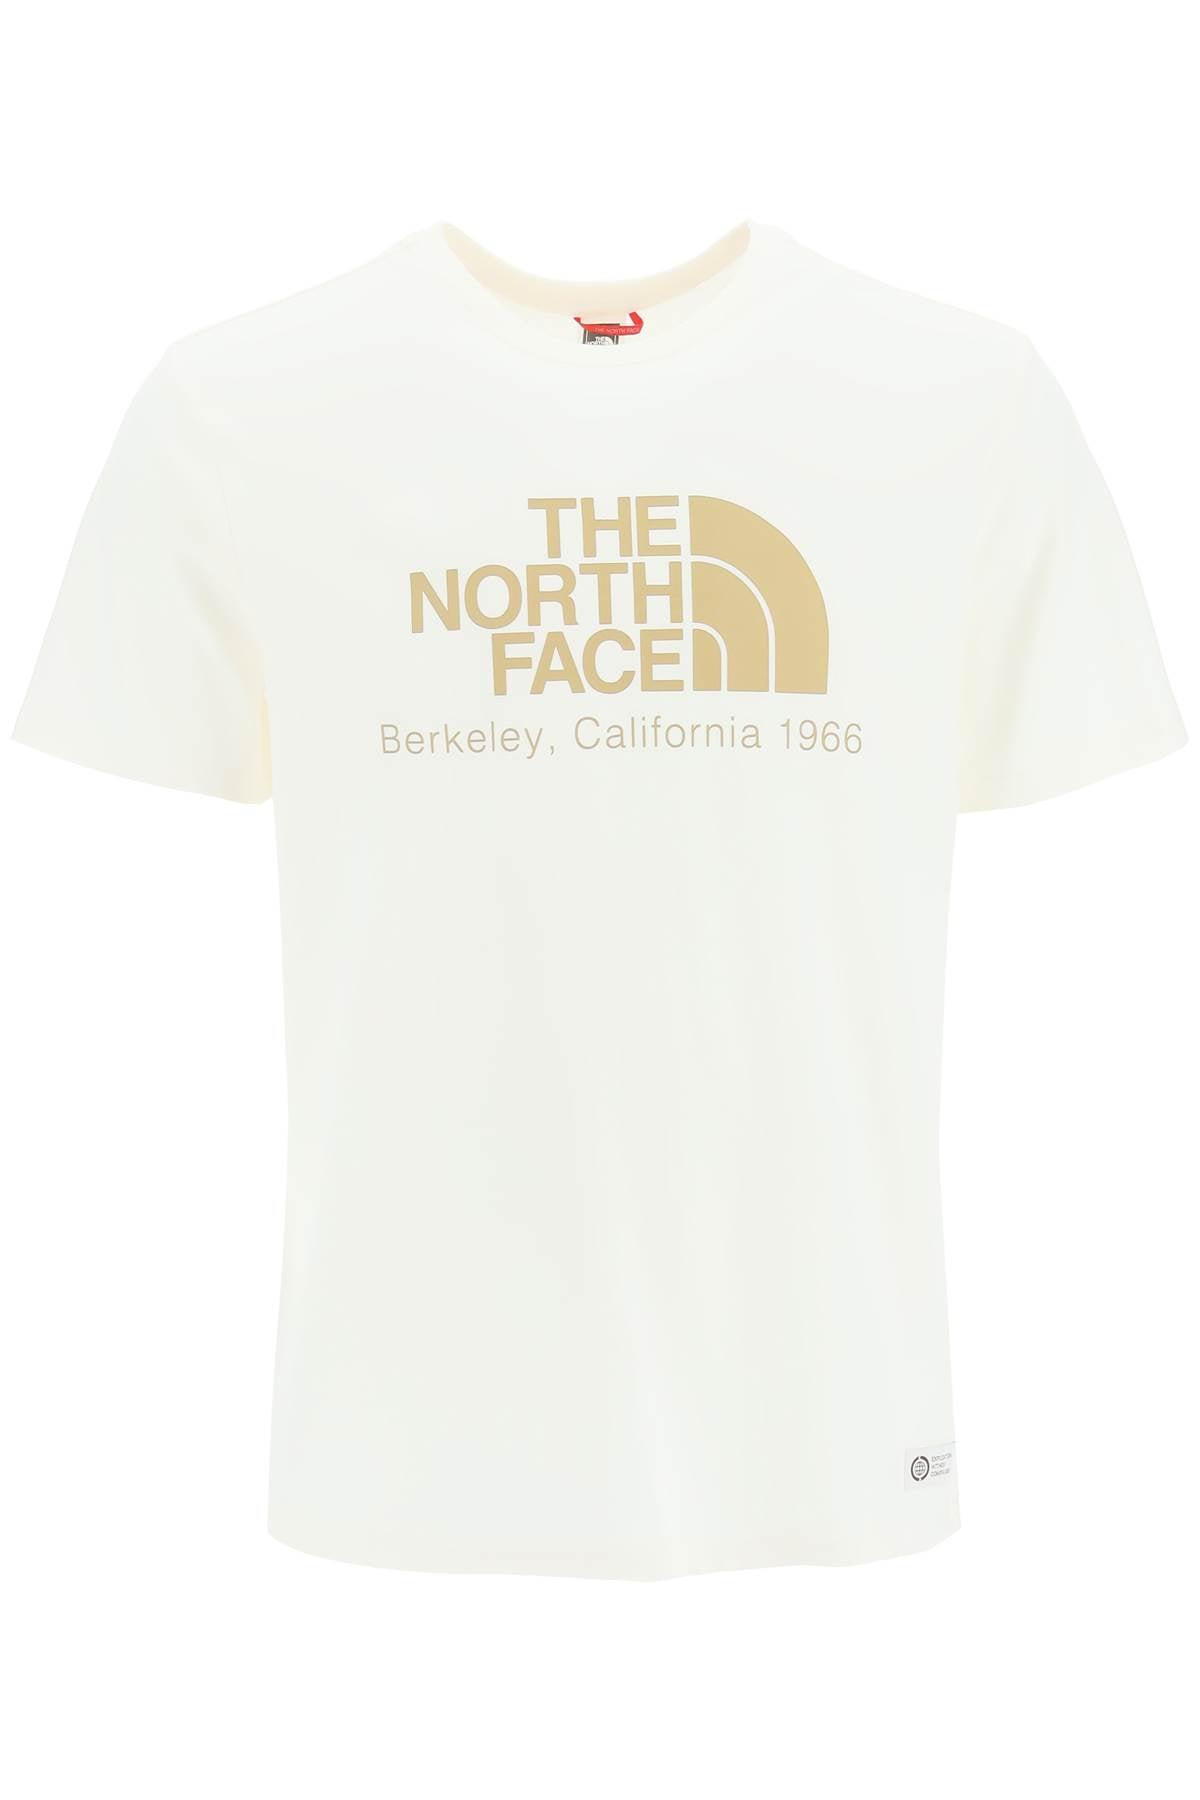 The North Face Berkeley California T-shirt in White for Men | Lyst